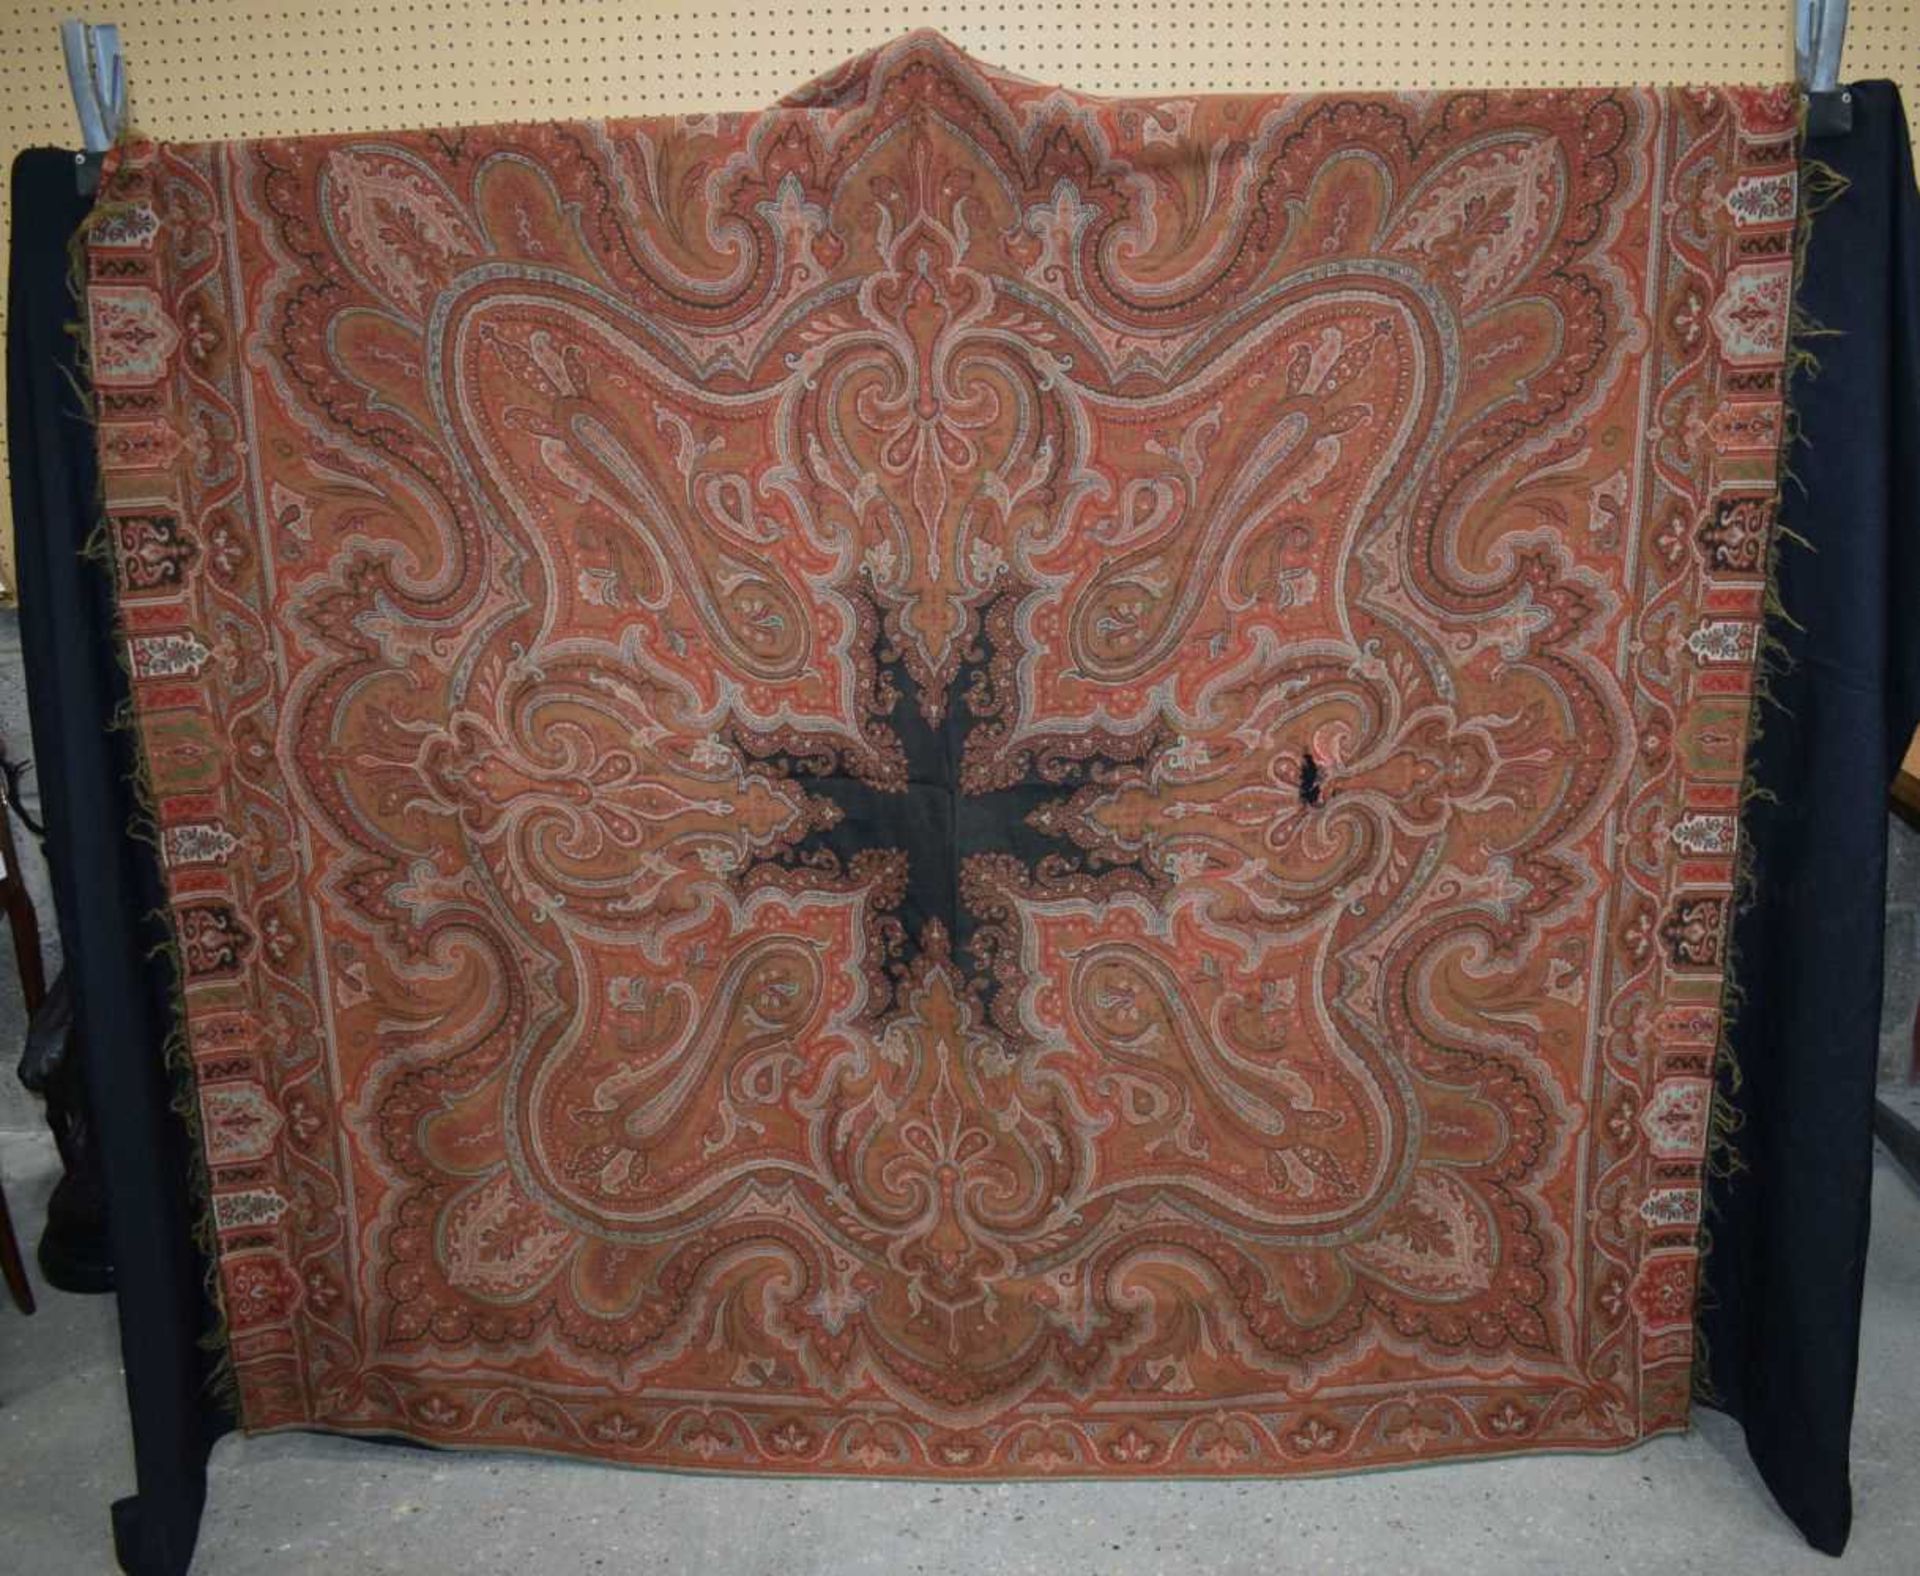 An antique Indian embroidered textile 140 x 140 cm - Image 2 of 10